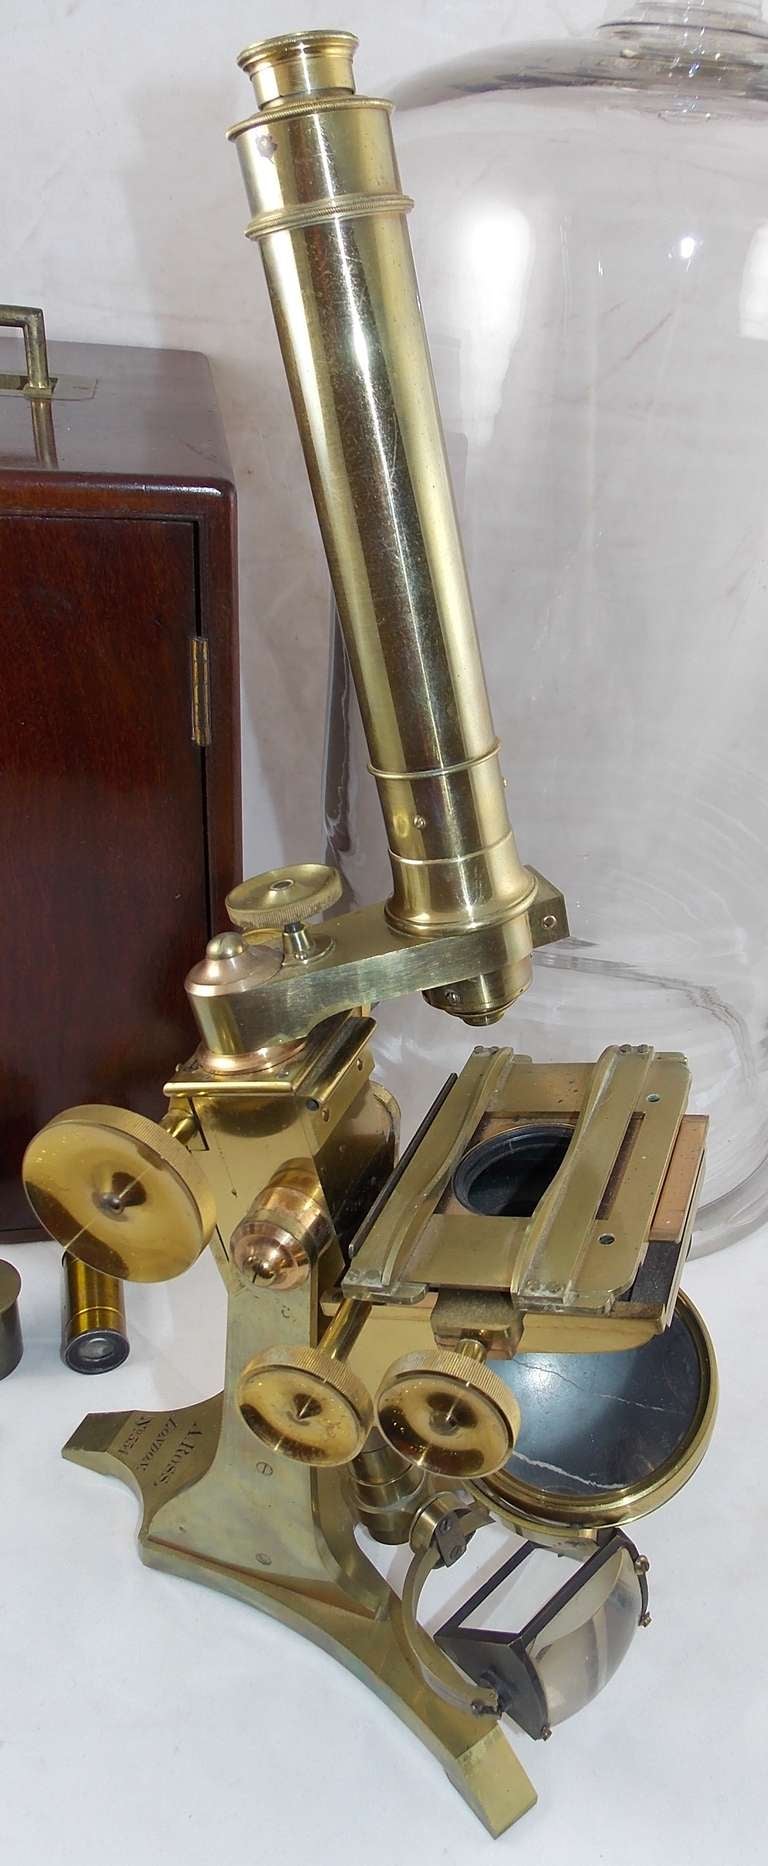 Brass, bar-limb microscope with Y-foot by Andrew Ross, London, circa 1845. Signed 